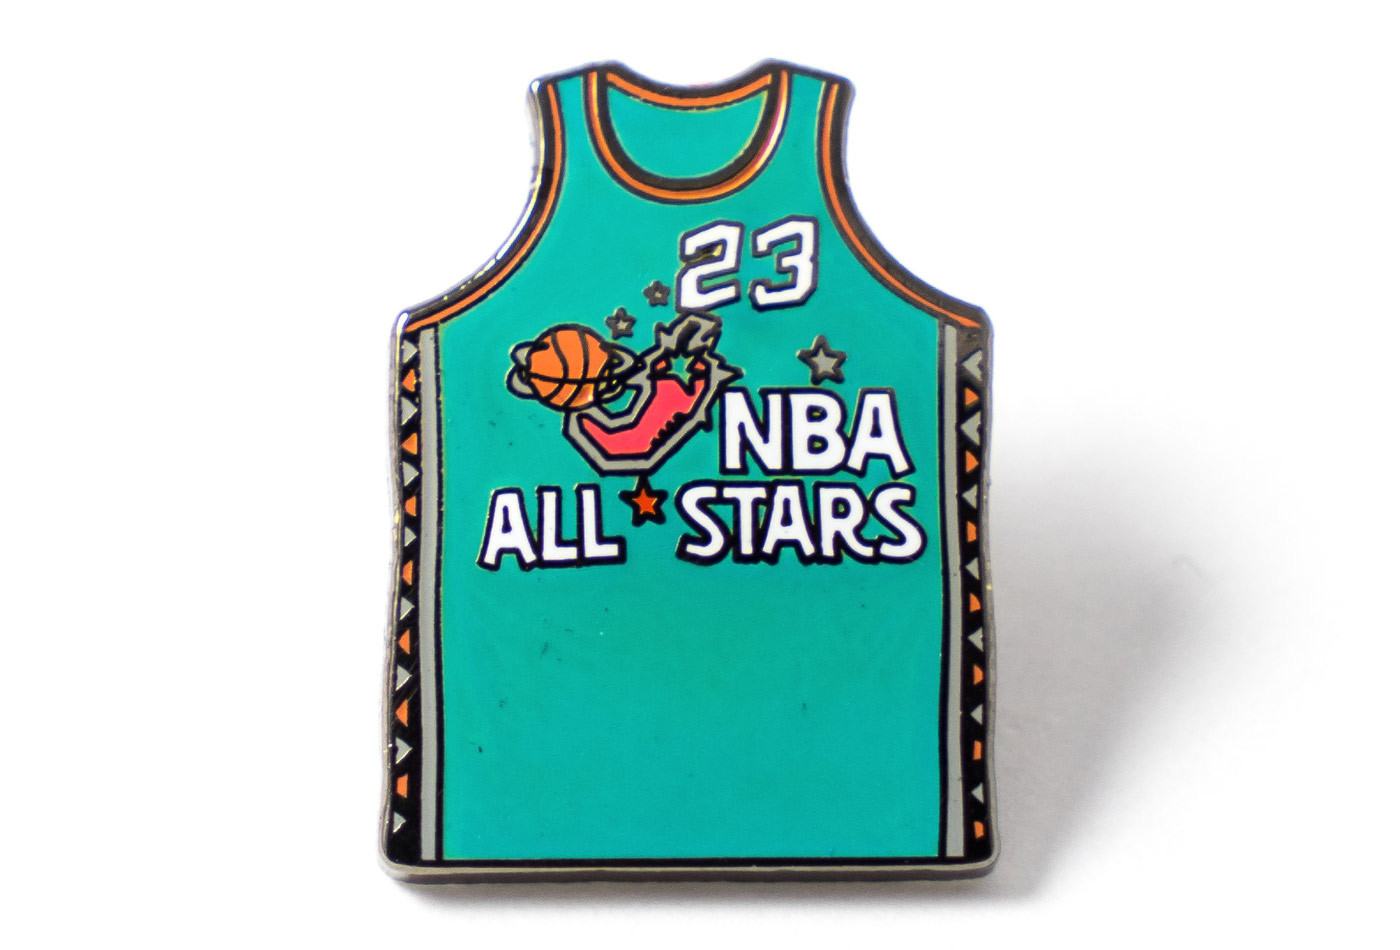 http://www.pintrill.com/collections/homepage-collection/products/all-star-jersey-23-pin-green?variant=14618323780